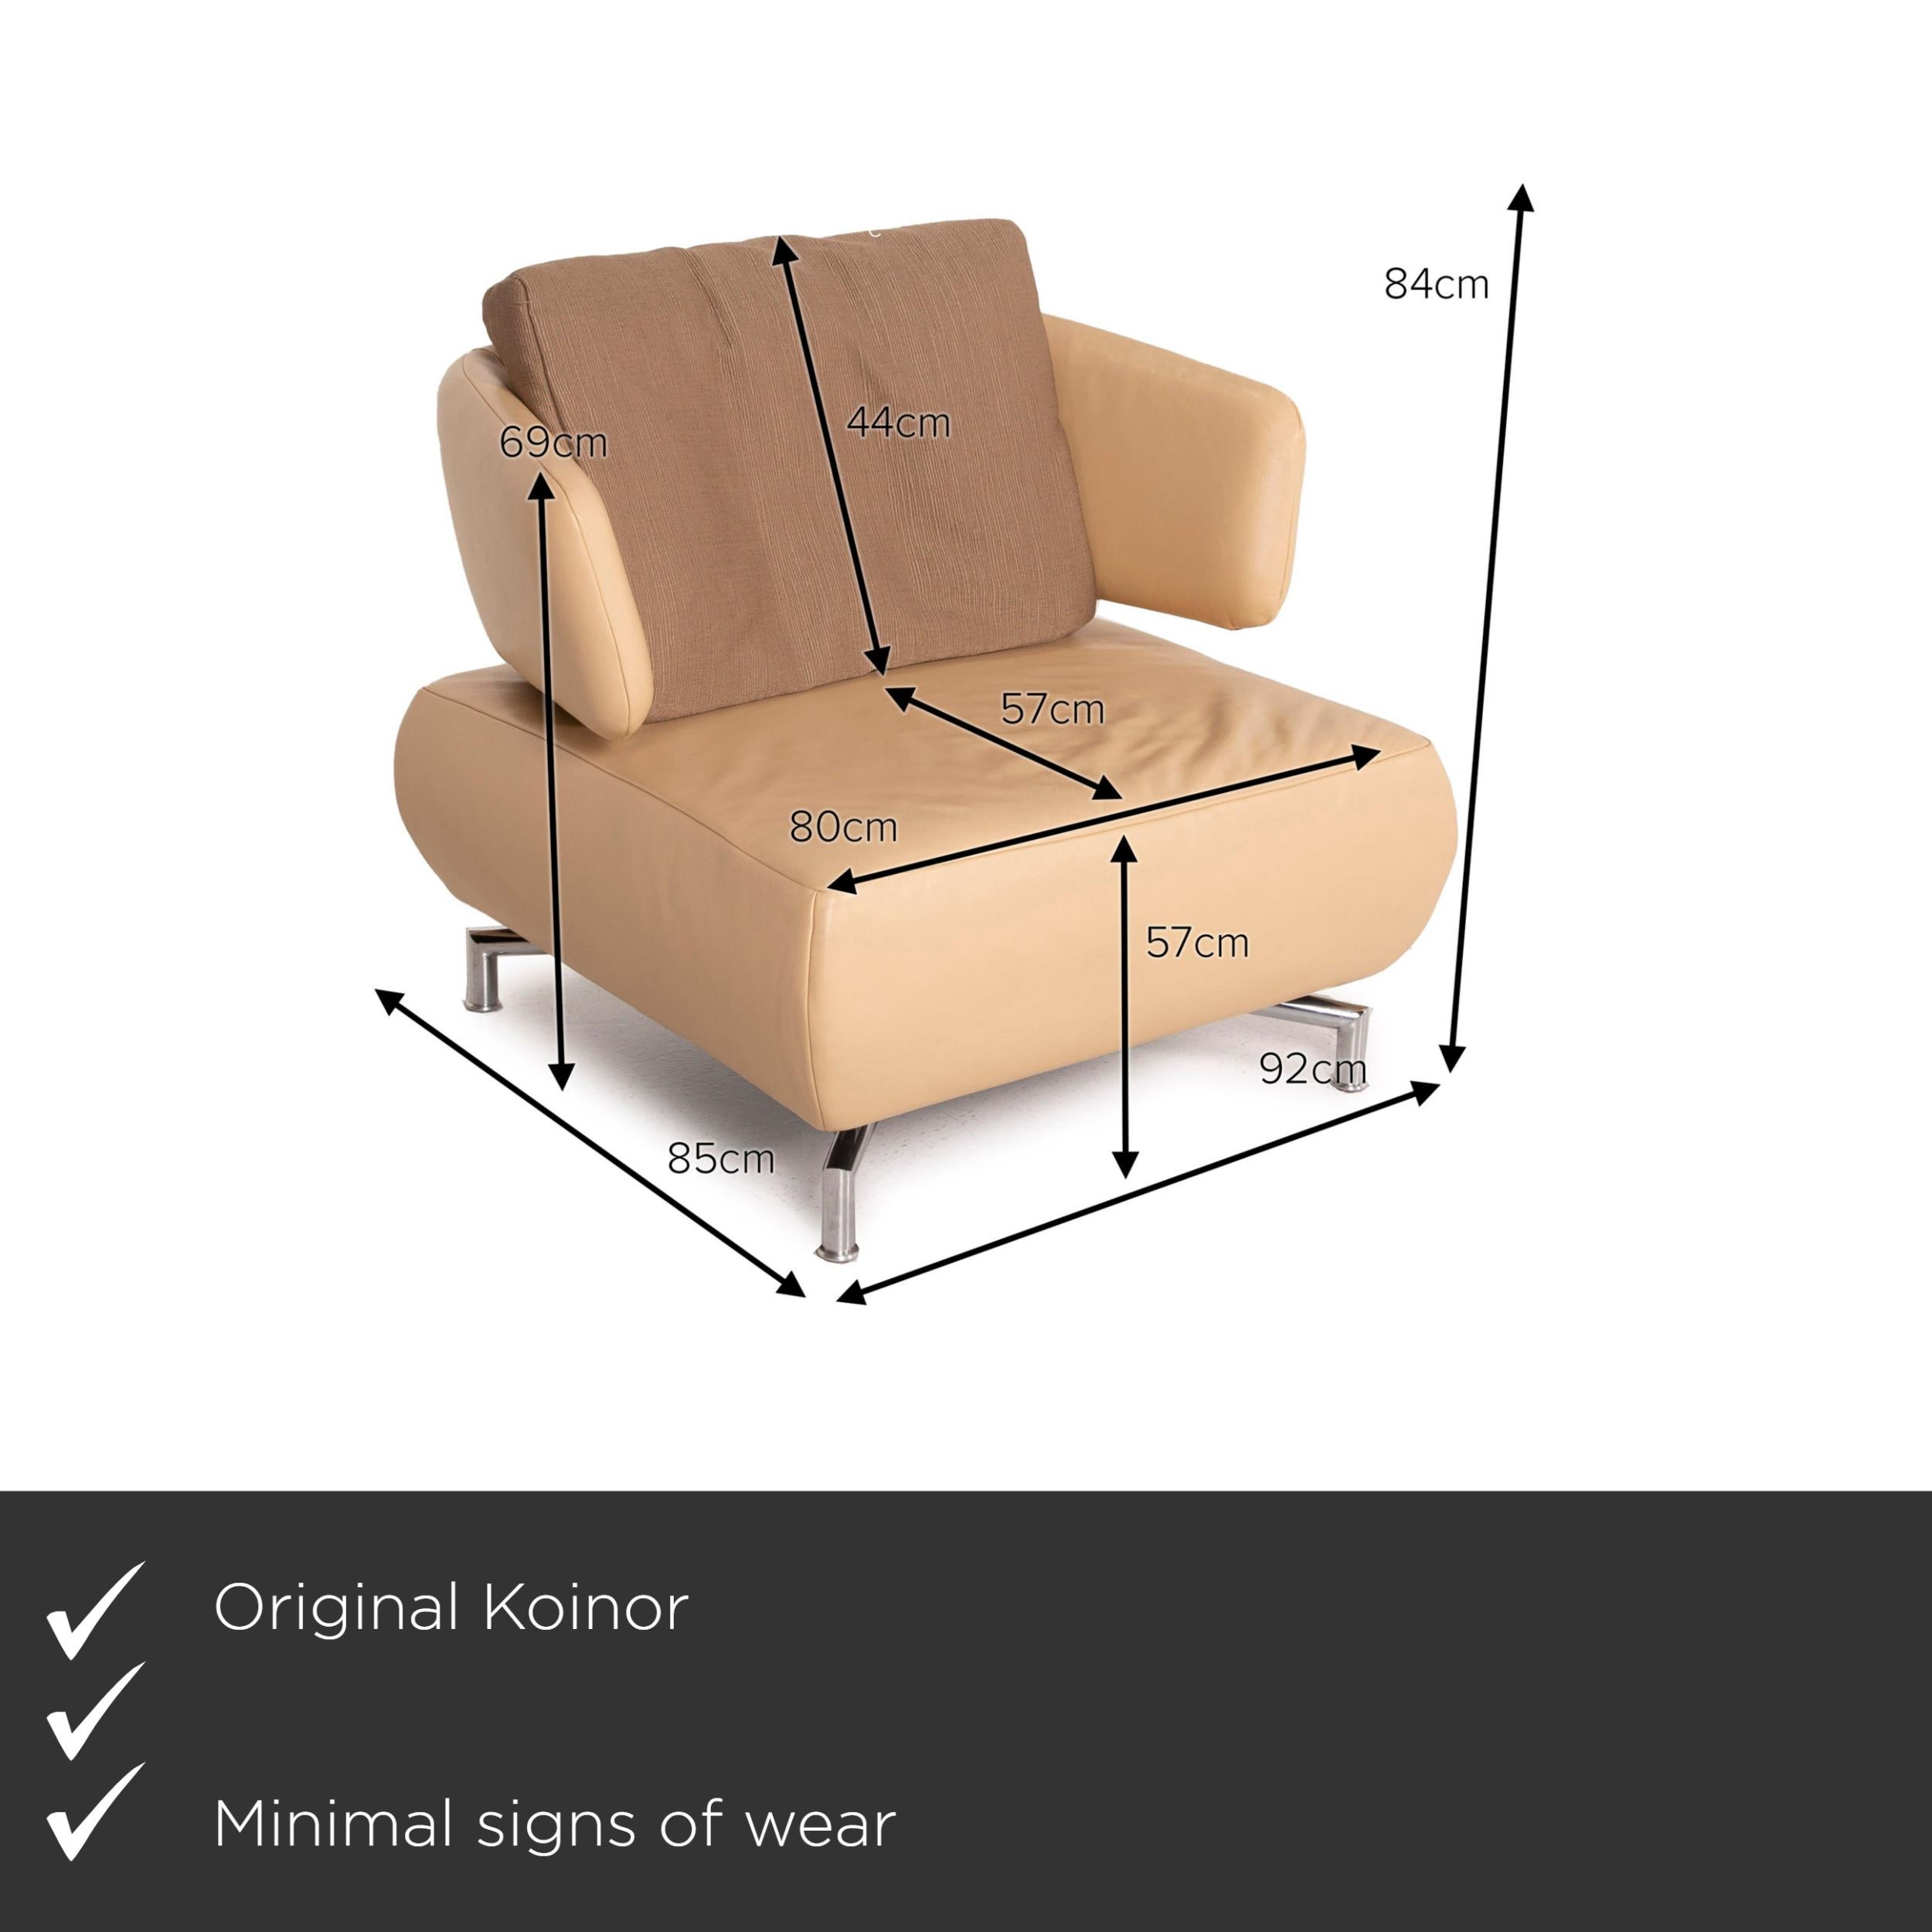 We present to you a Koinor leather armchair in beige fabric.


 Product measurements in centimeters:
 

Depth: 85
Width: 92
Height: 84
Seat height: 40
Rest height: 69
Seat depth: 57
Seat width: 80
Back height: 44.
 